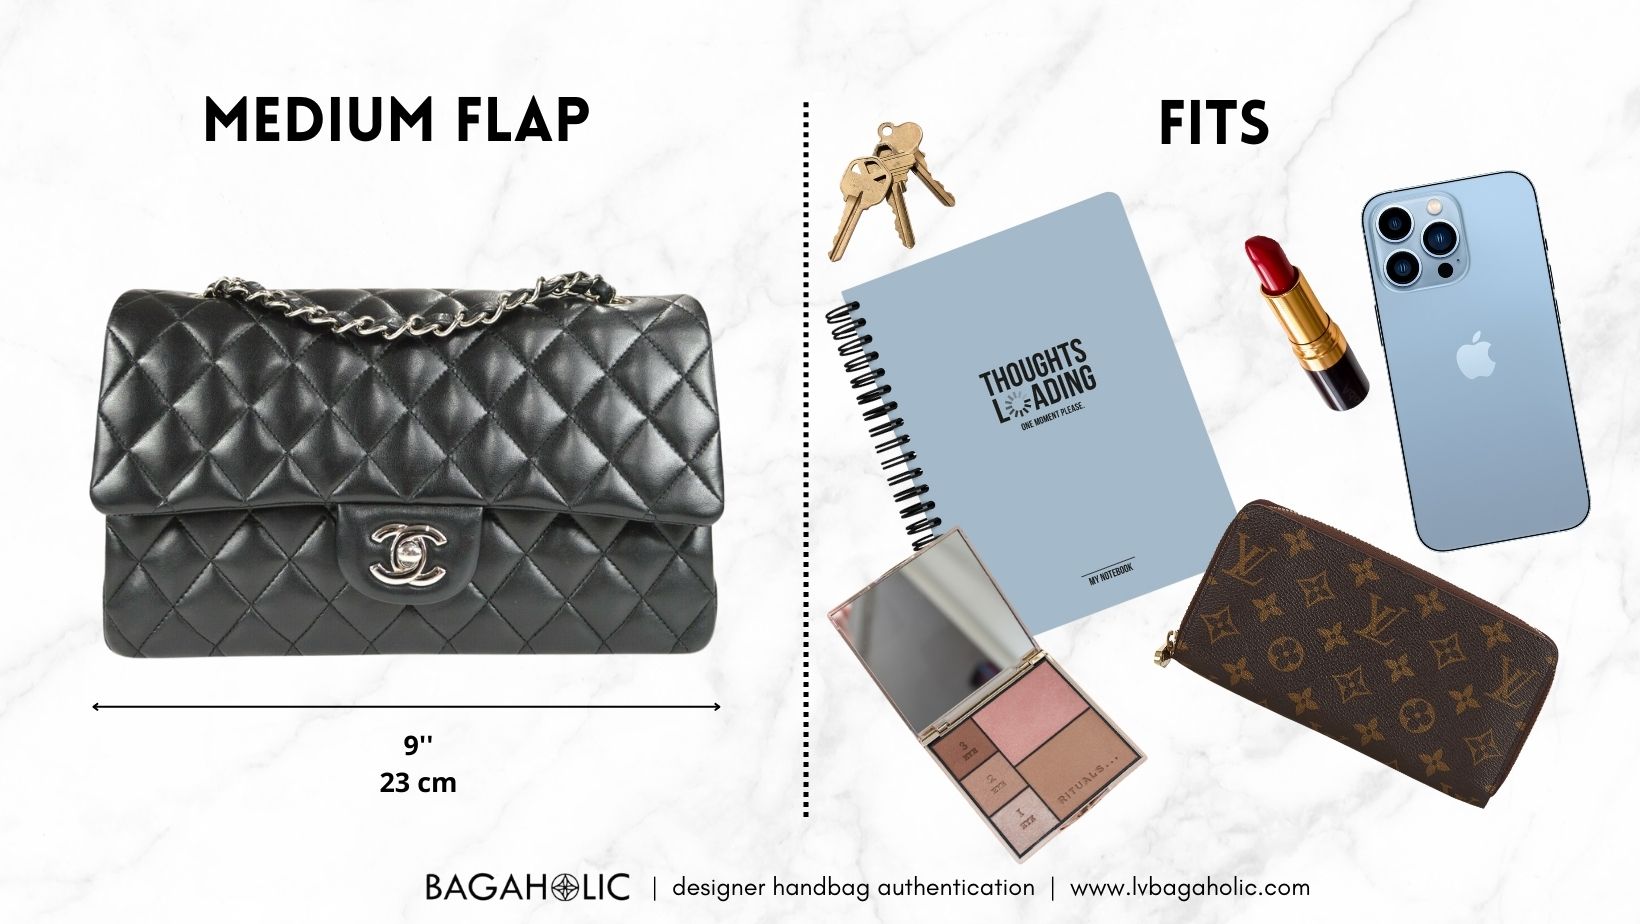 what fits into chanel medium flap size